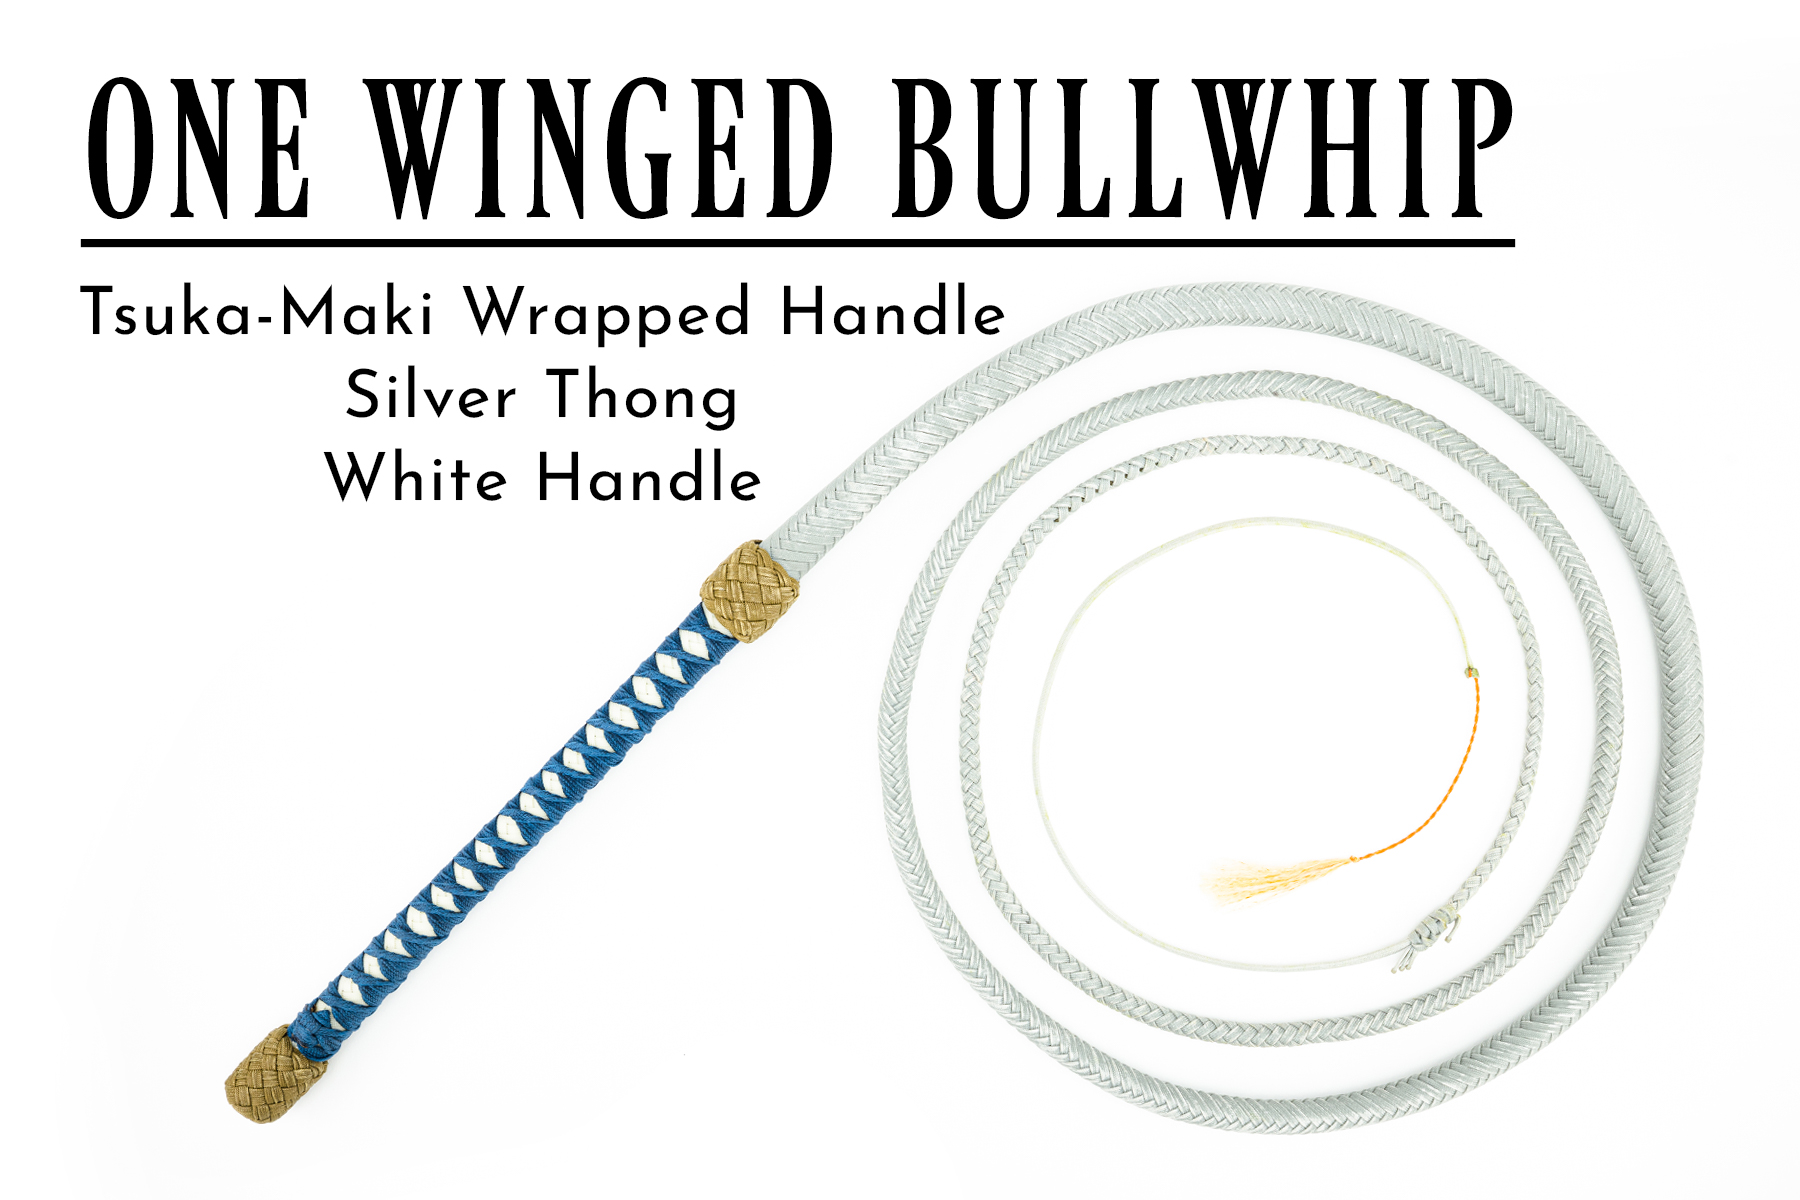 The One Winged Bullwhip